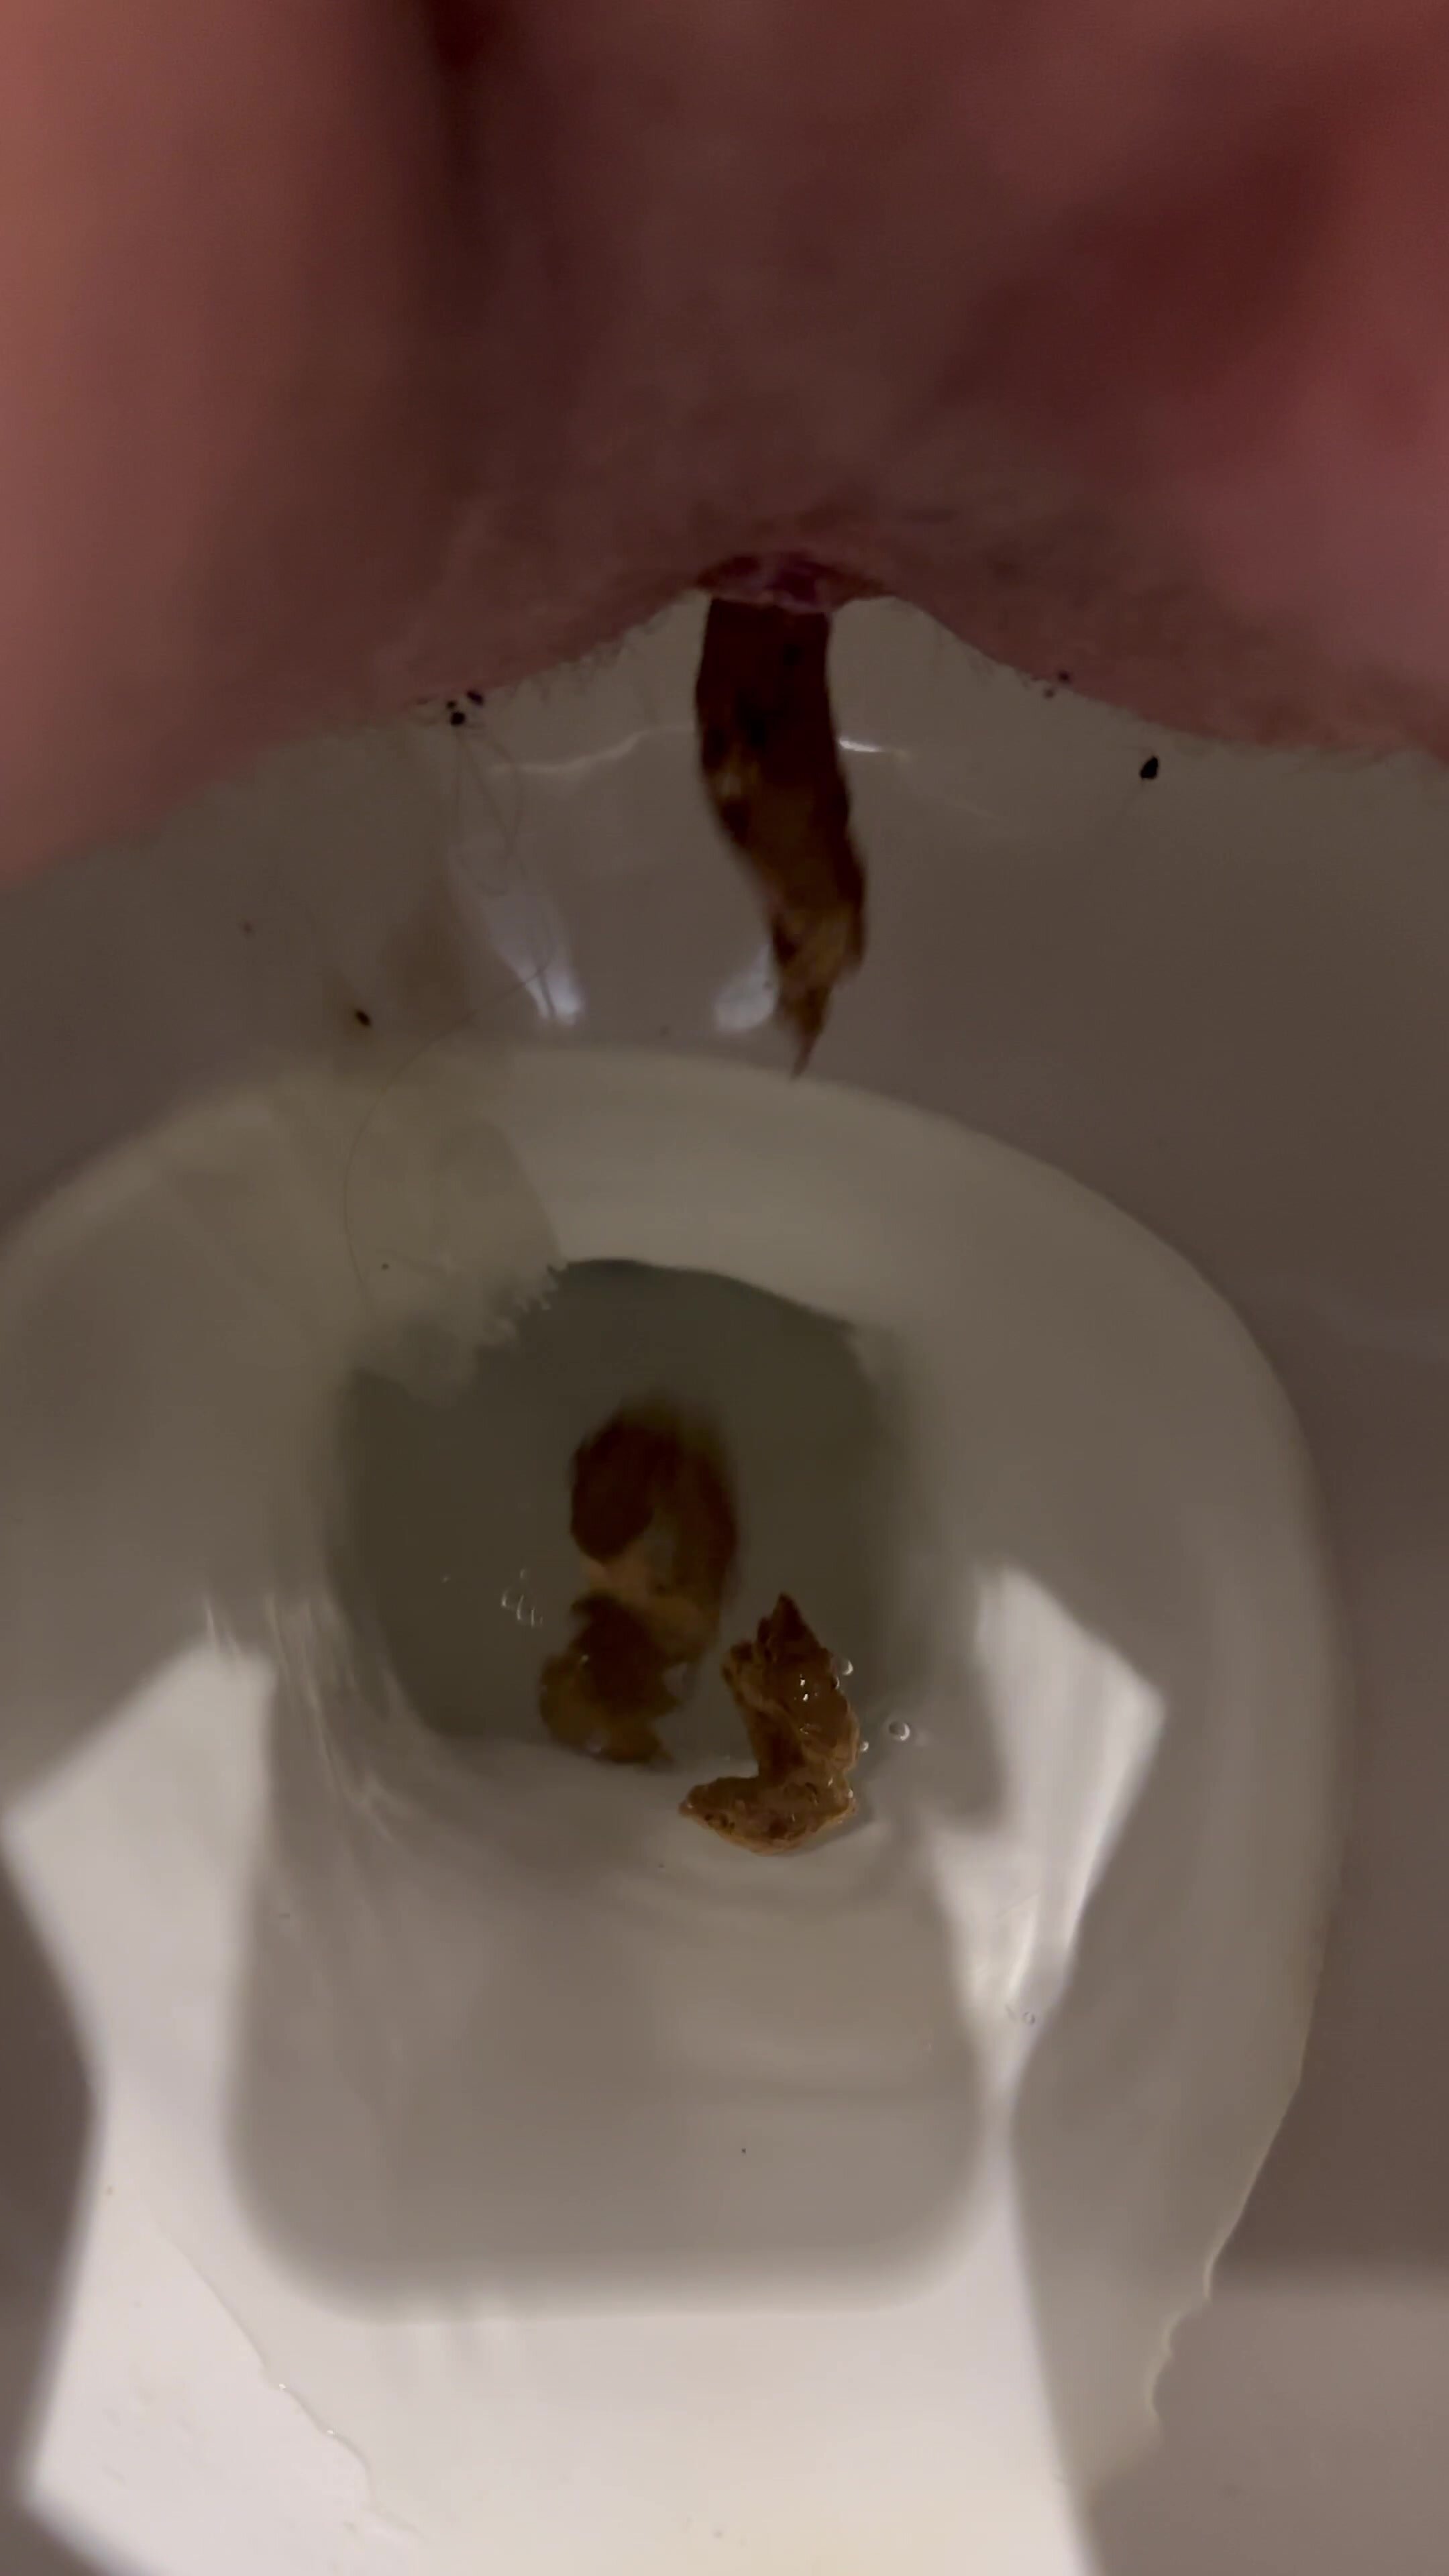 Small shit and piss at work